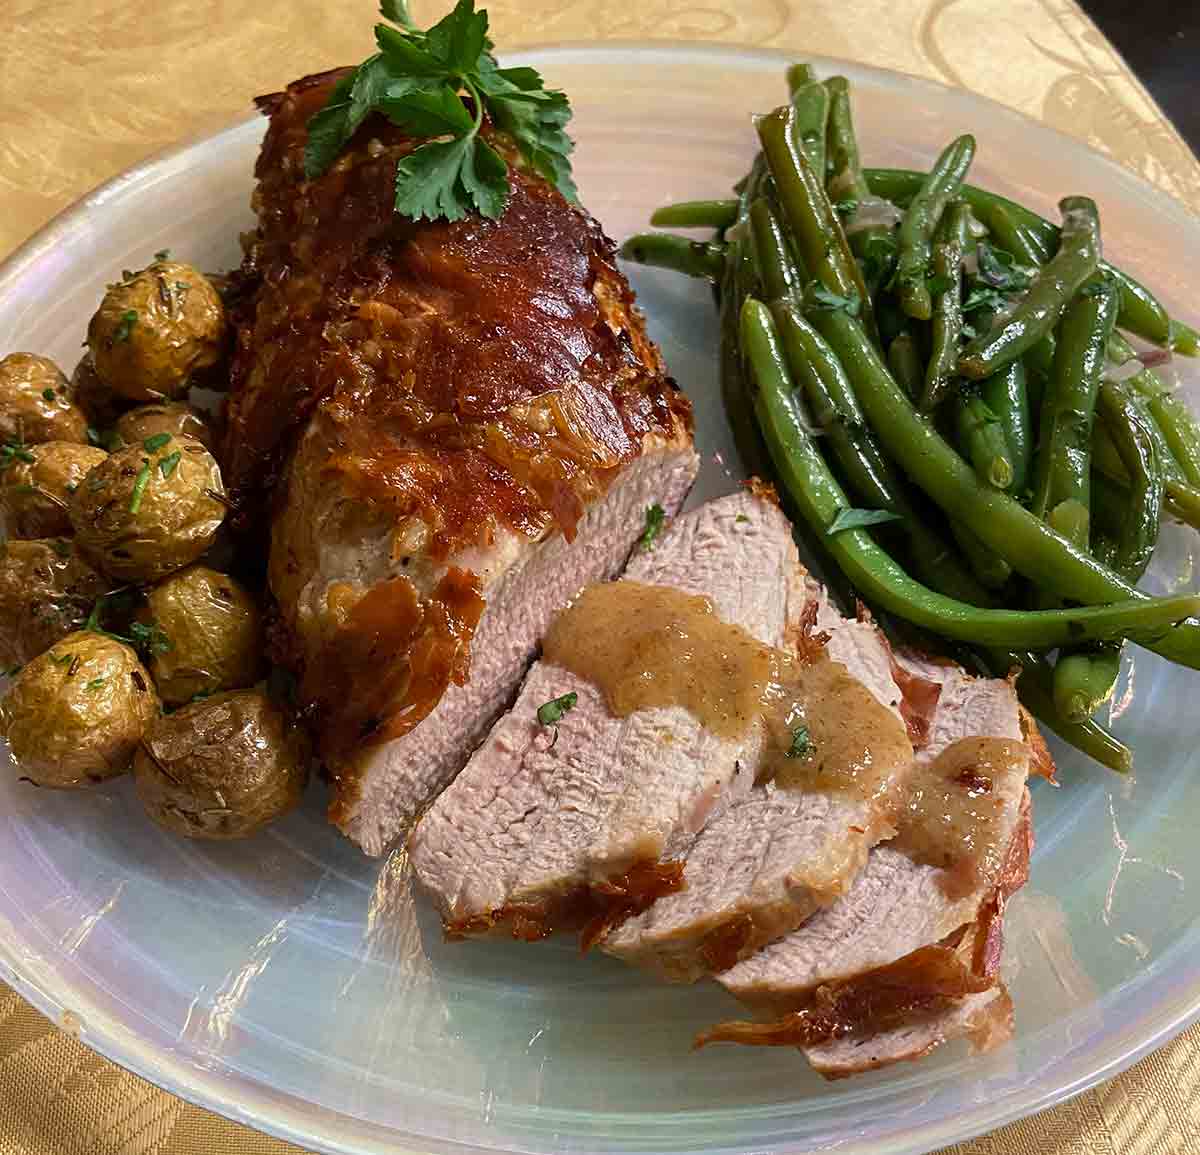 A sliced air fryer prosciutto-wrapped pork tenderloin on a plate with green beans and roasted baby potatoes